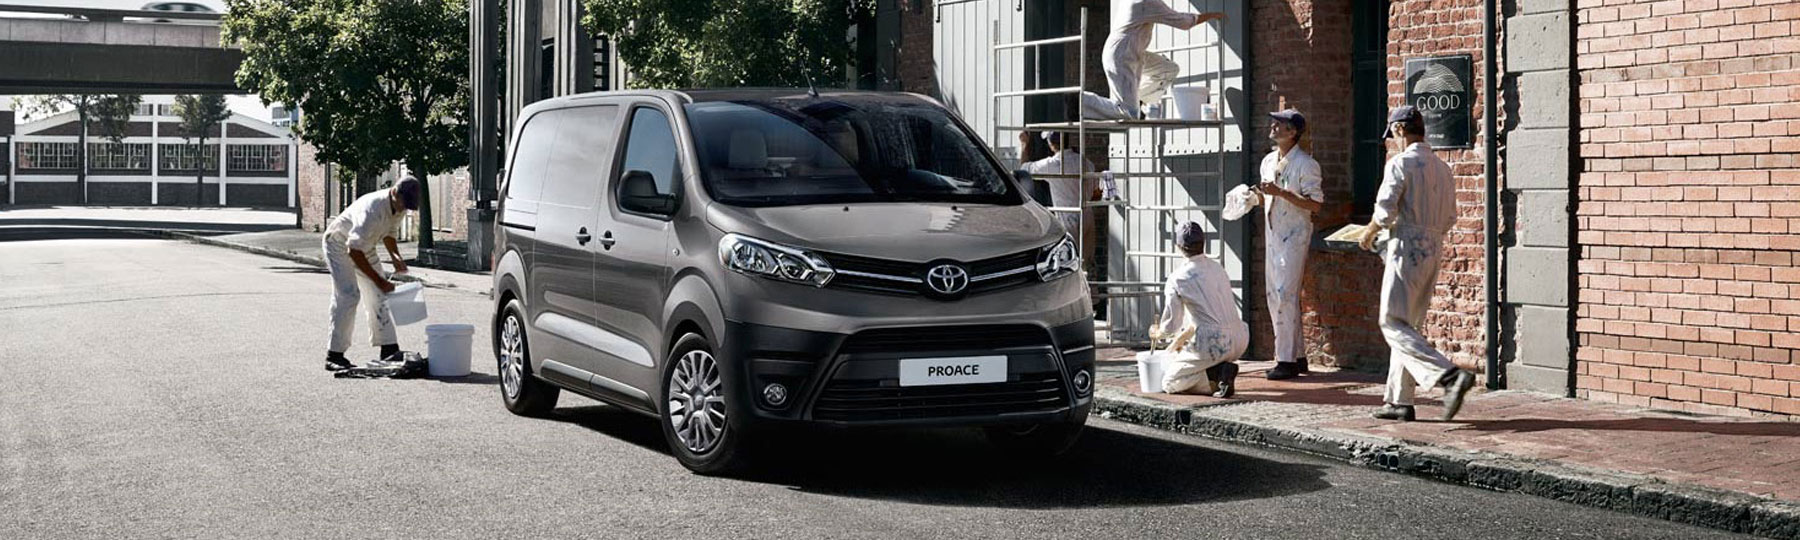 toyota Proace Business Offer